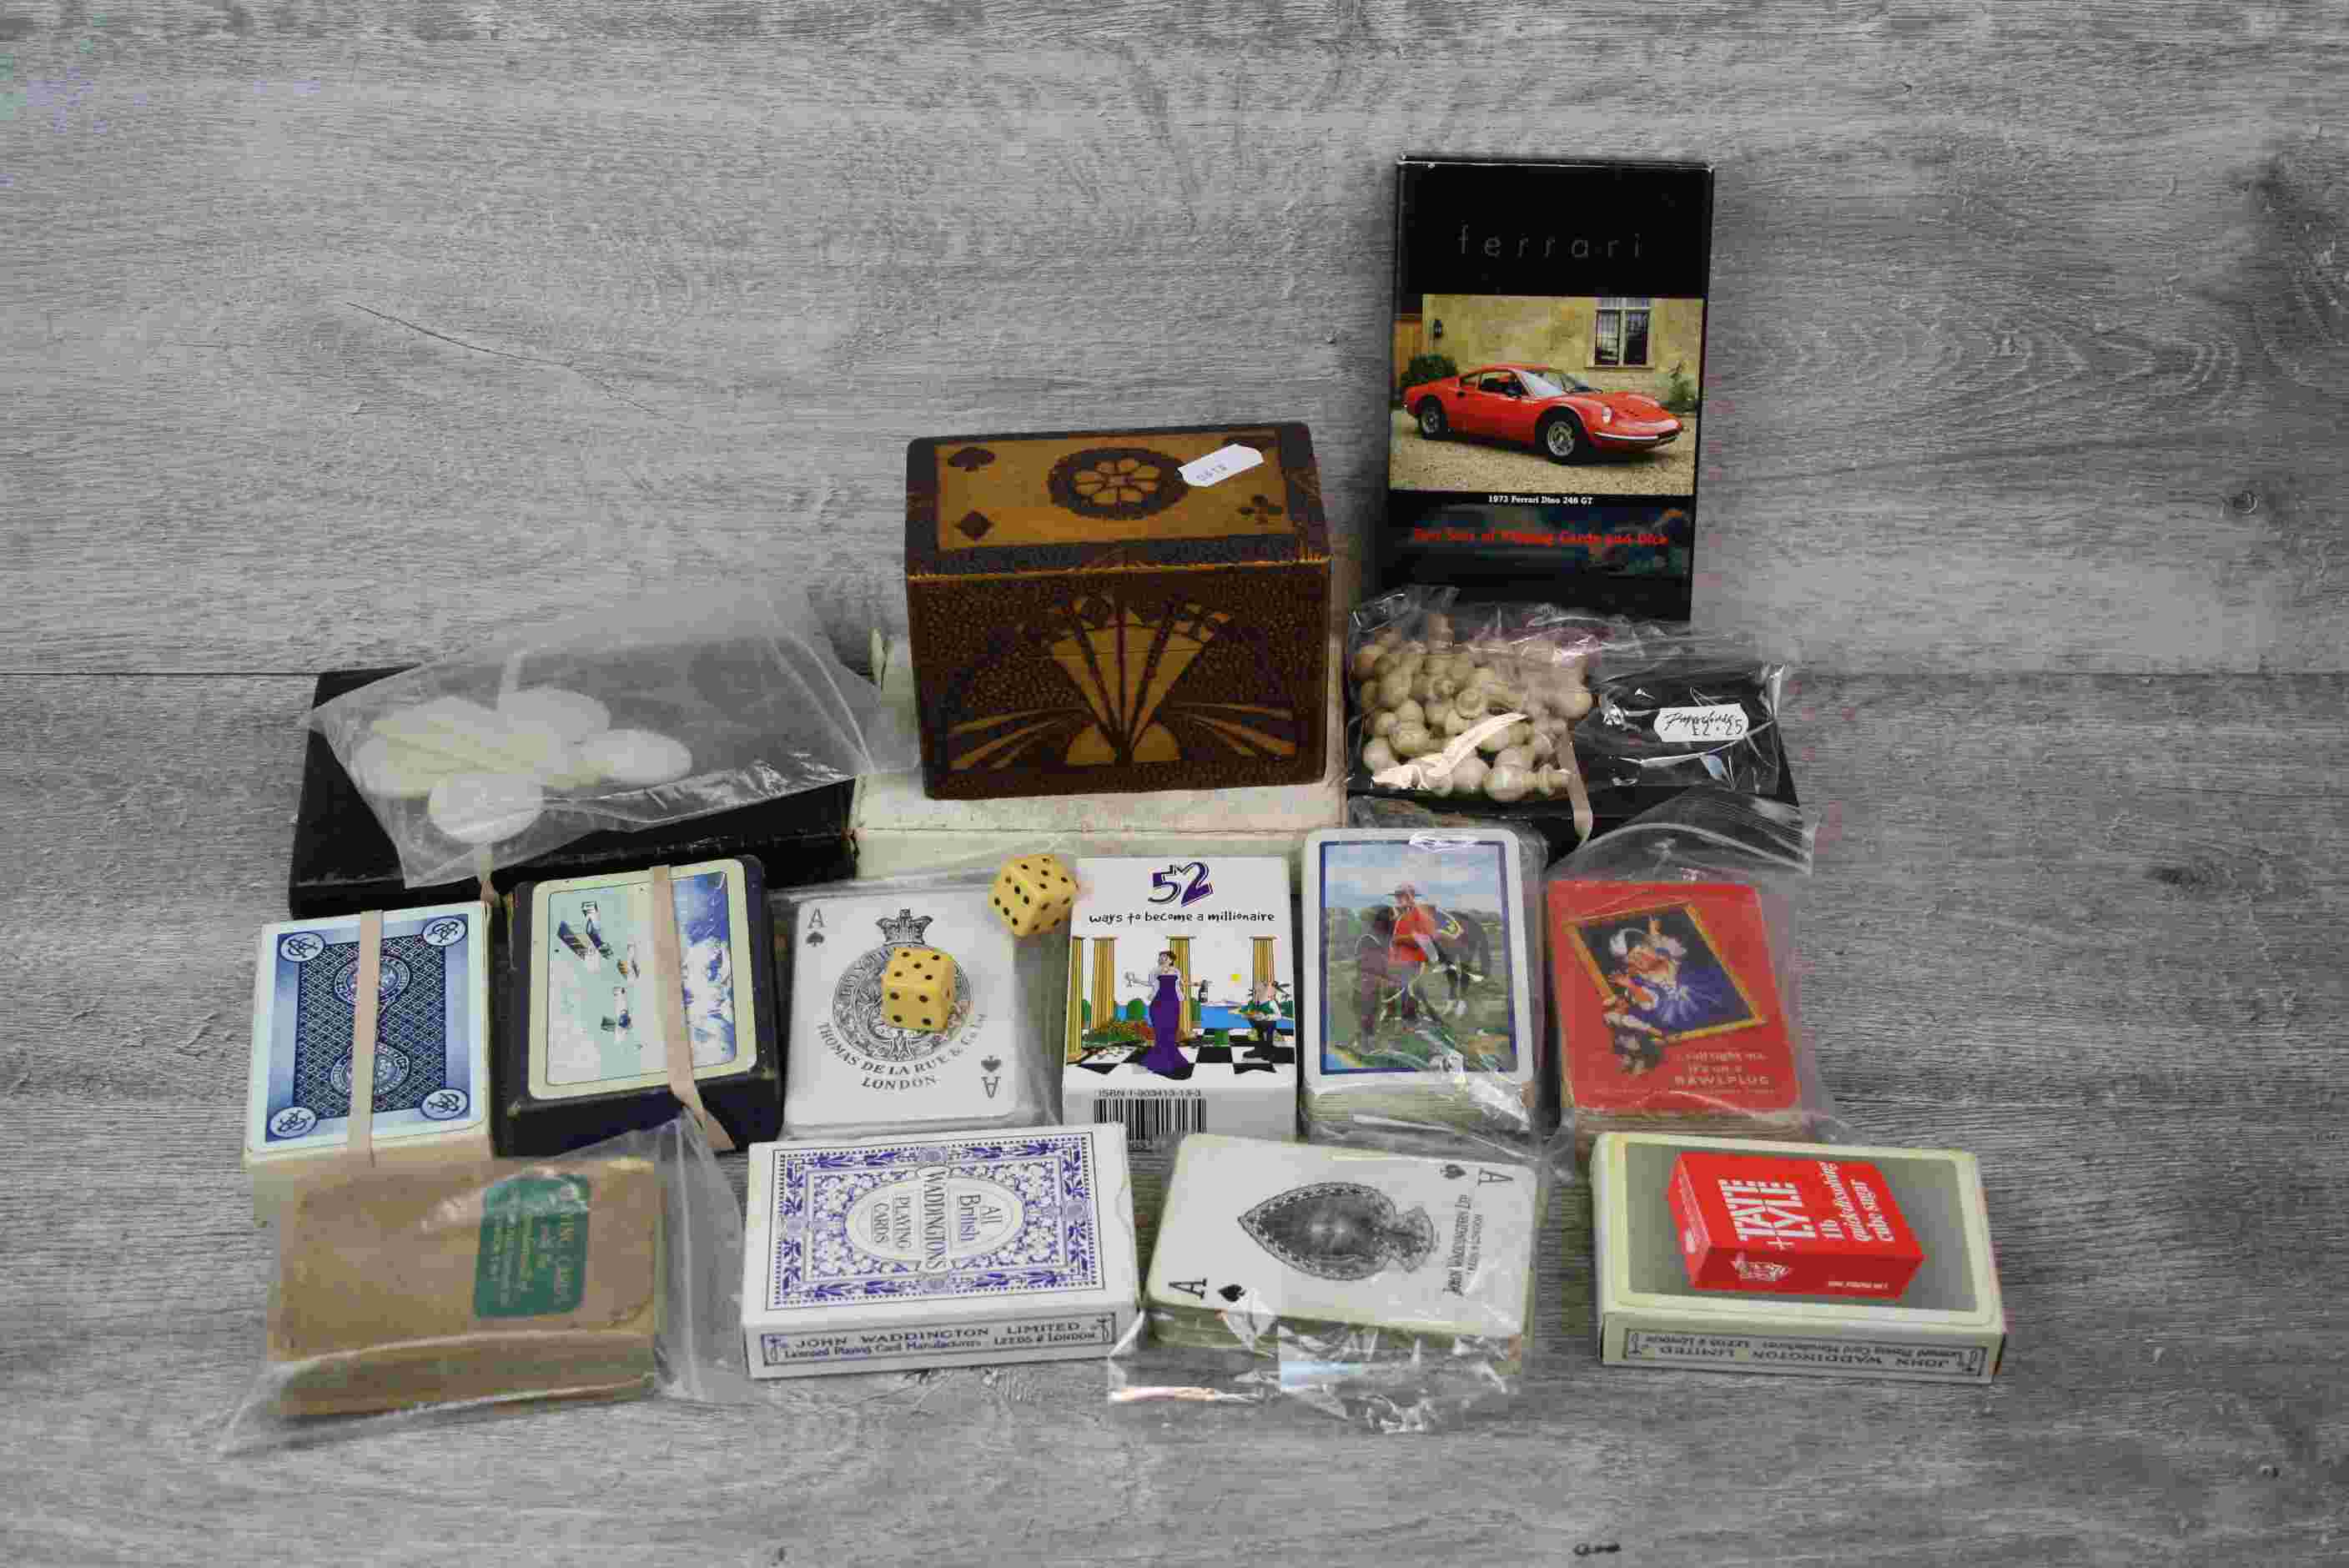 Collection of advertising playing cards, games pieces, mother-of-pearl gaming counters and a